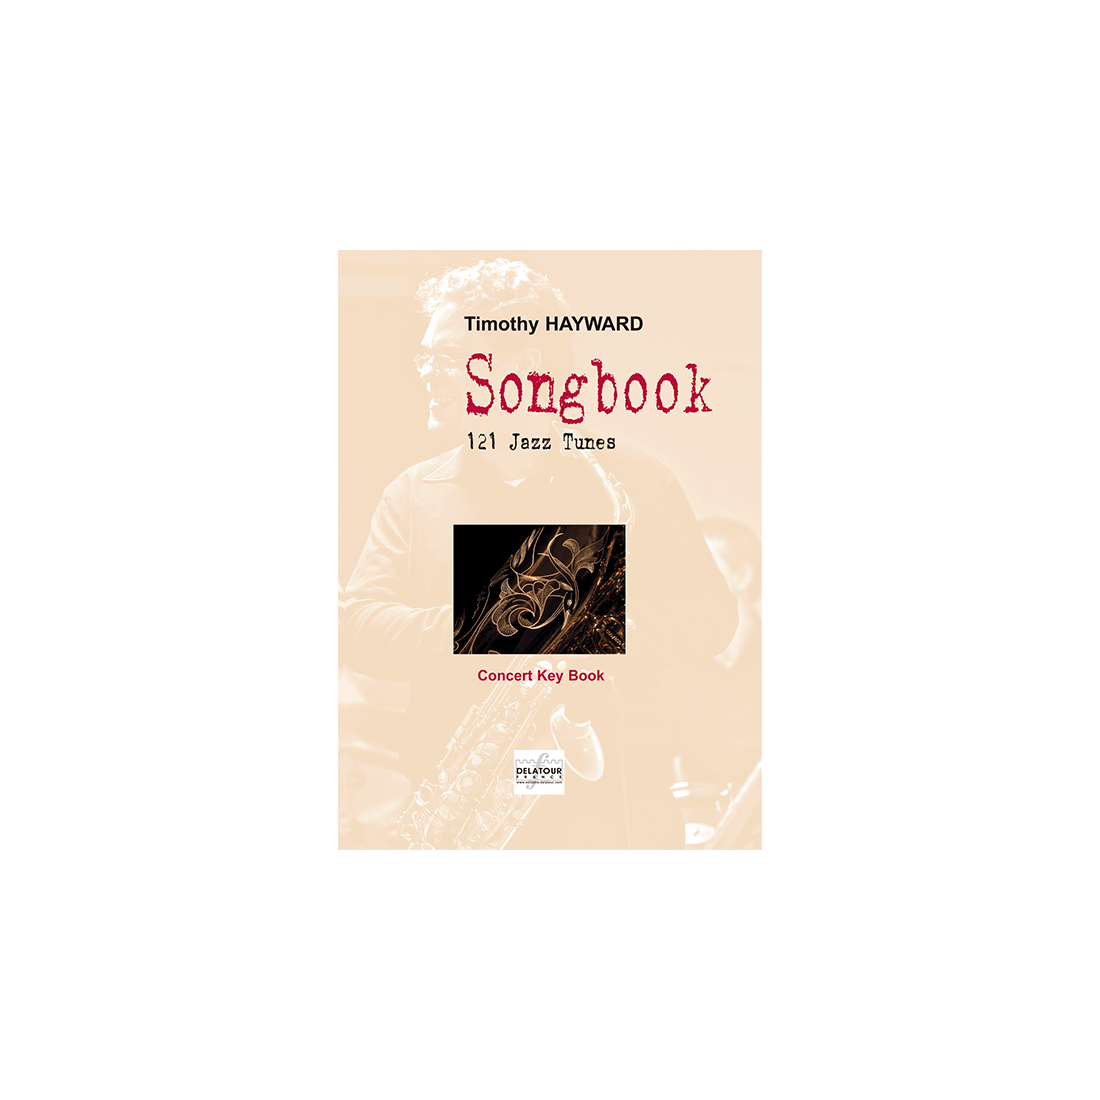 Songbook - 121 Jazz Tunes pour piano-jazz (concert key book)